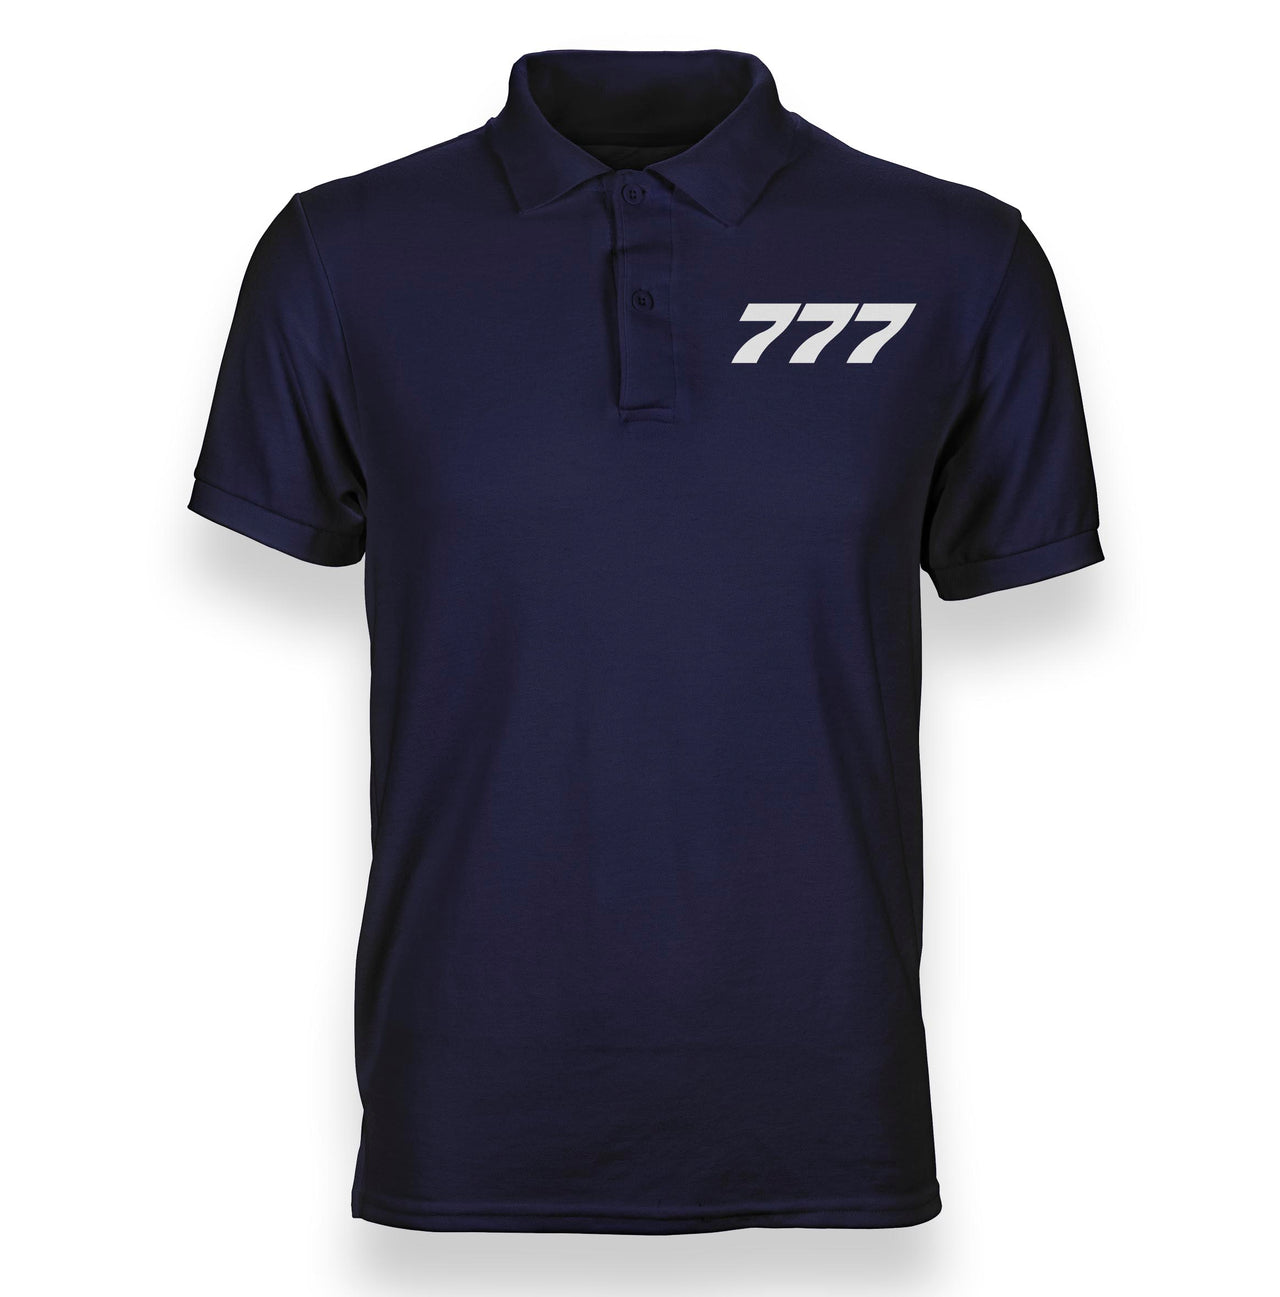 Boeing 777 Flat Text Designed Polo T-Shirts